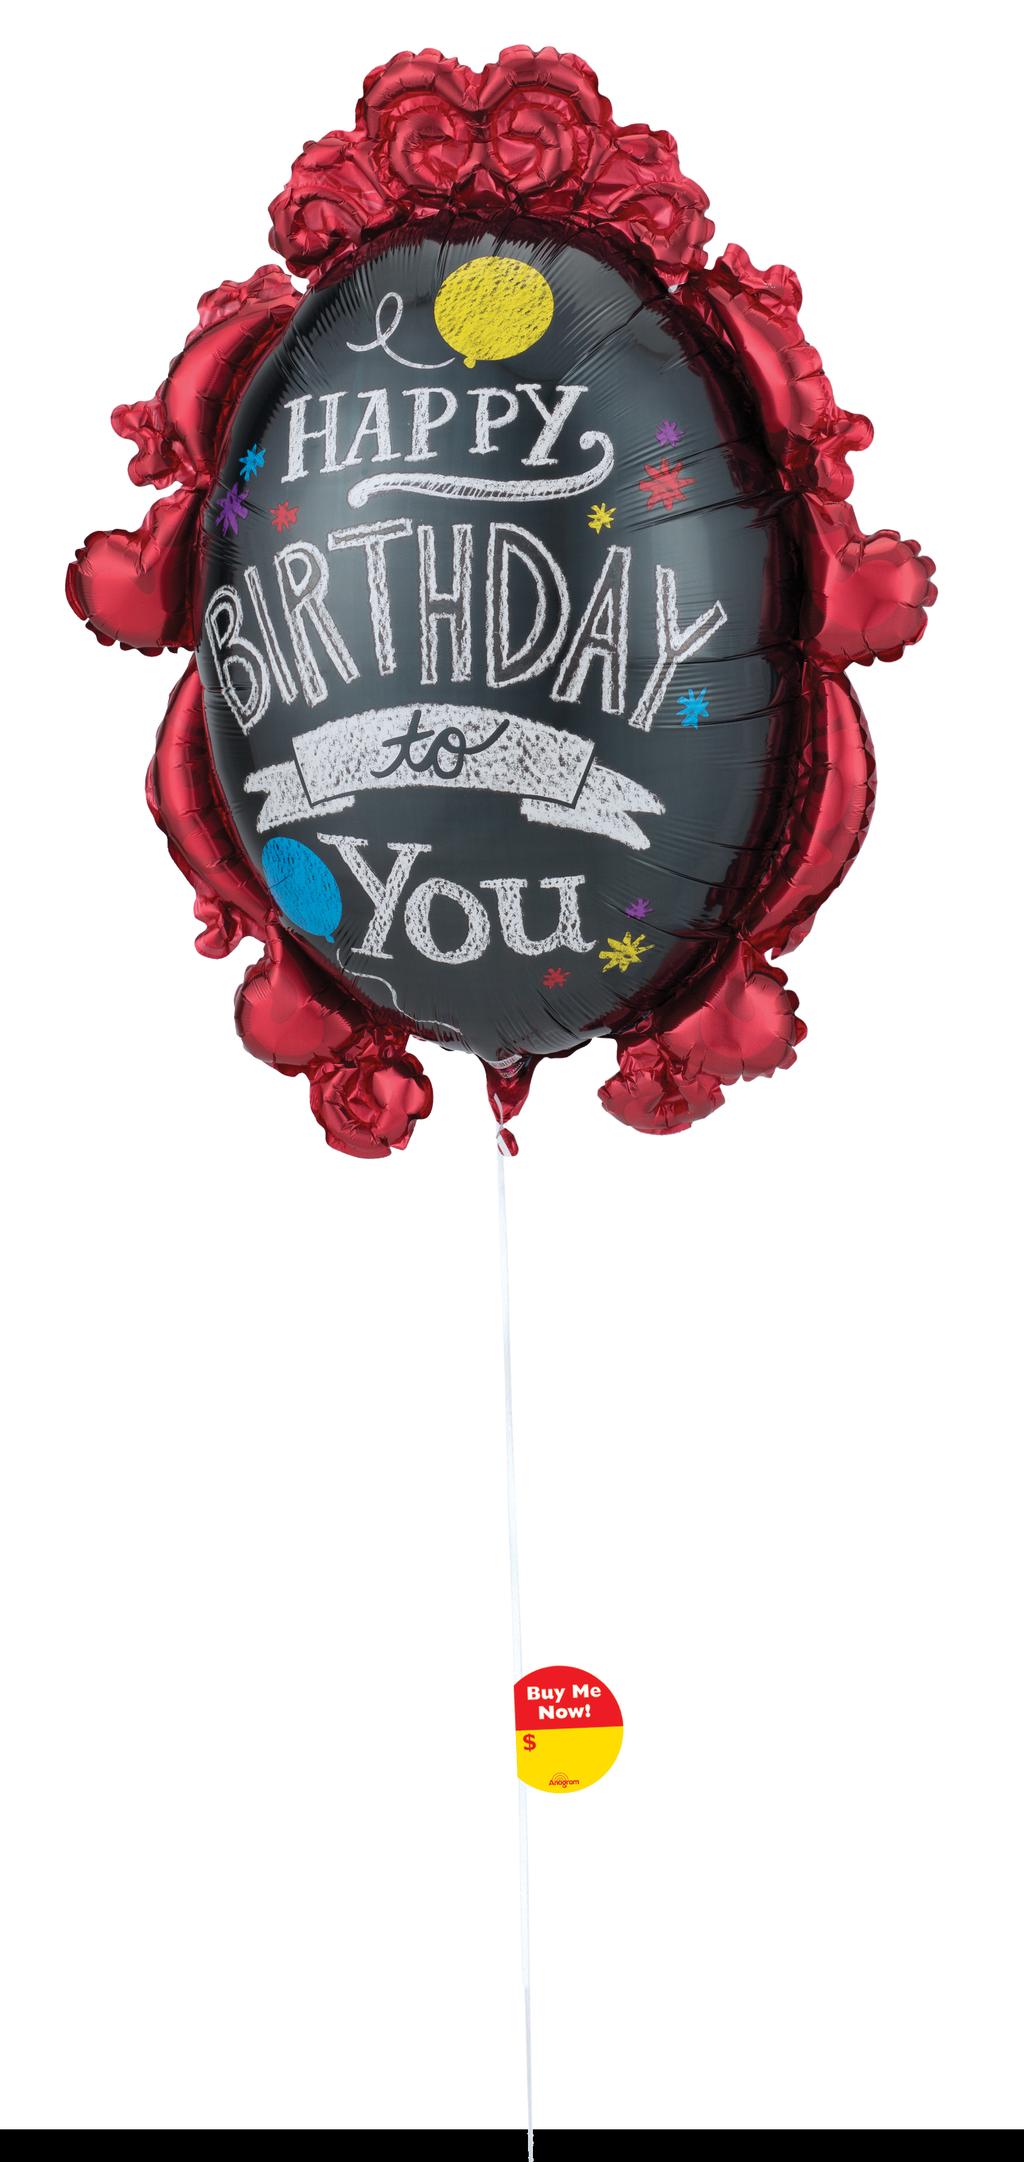 make pricing clear Customers need to know that an inflated Anagram balloon is for sale and not a store decoration this is especially important with